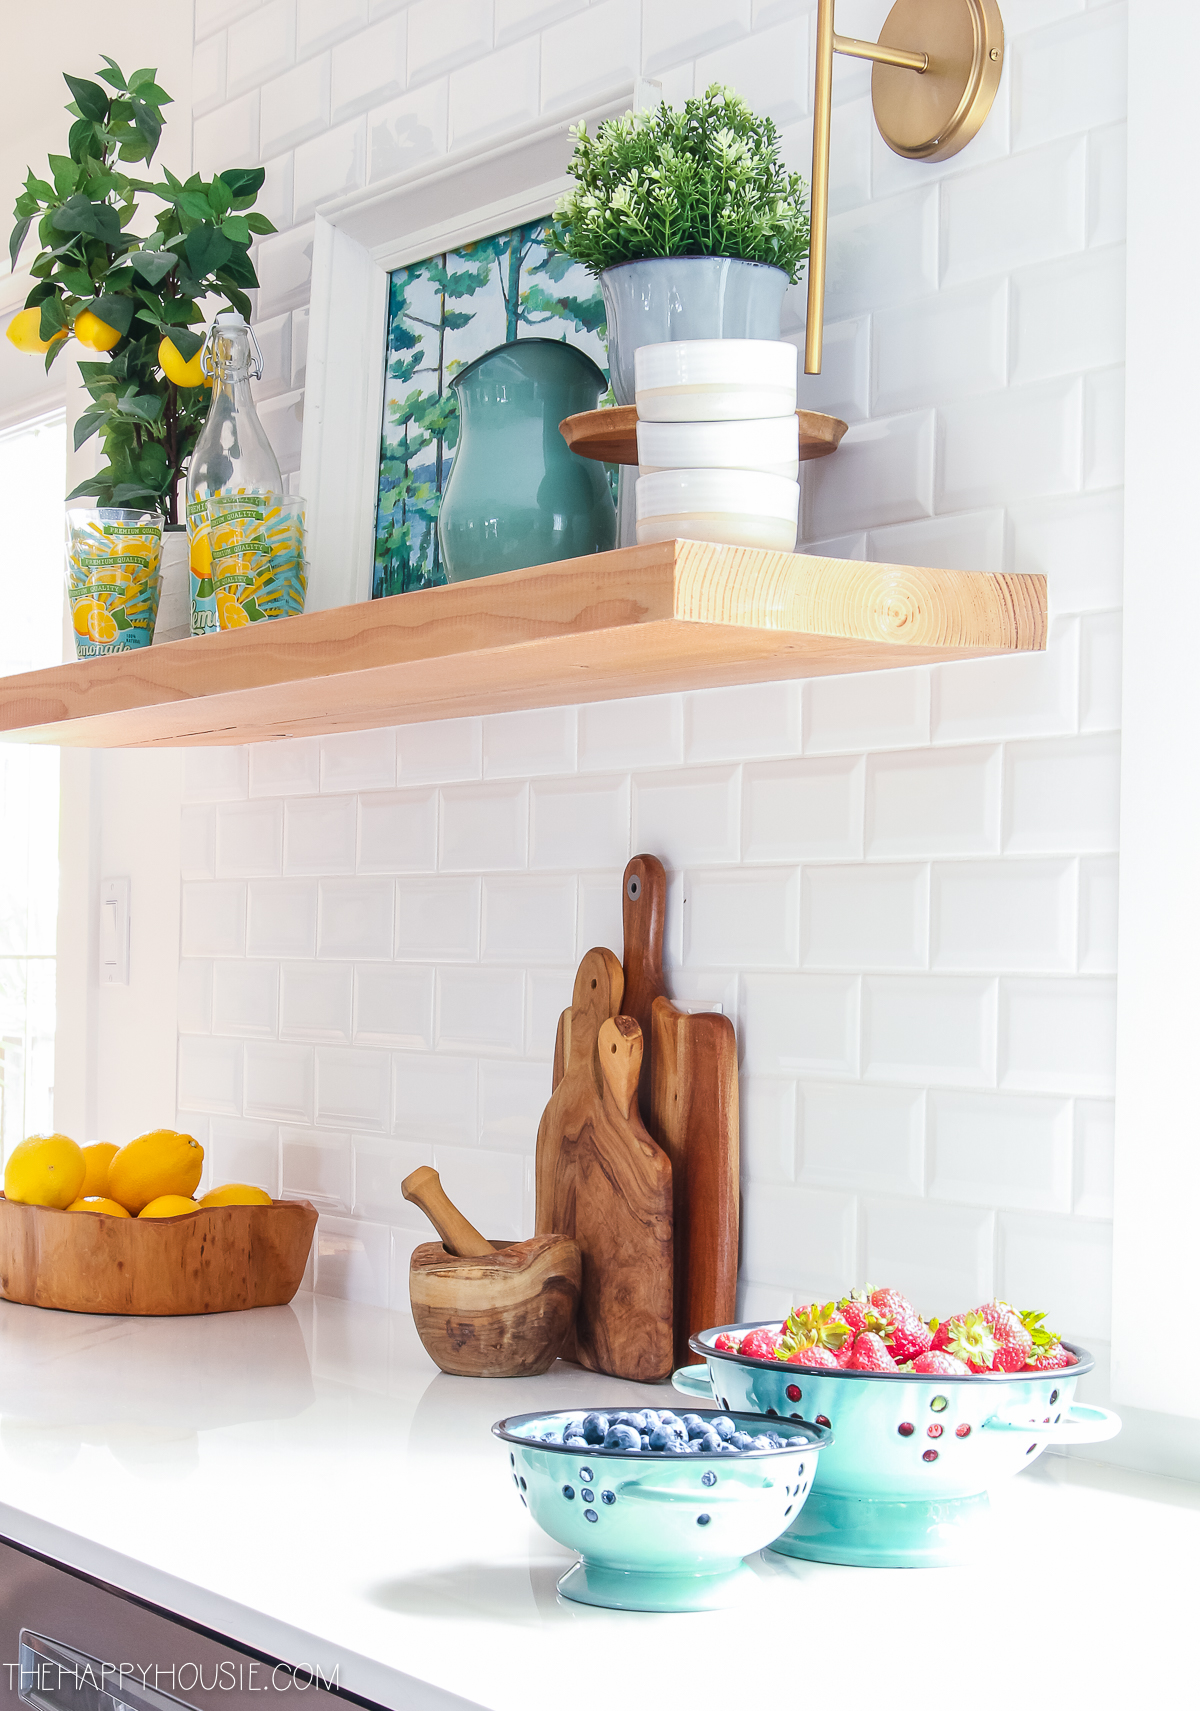 Wooden cutting boards are leaning against the white tile in the kitchen.